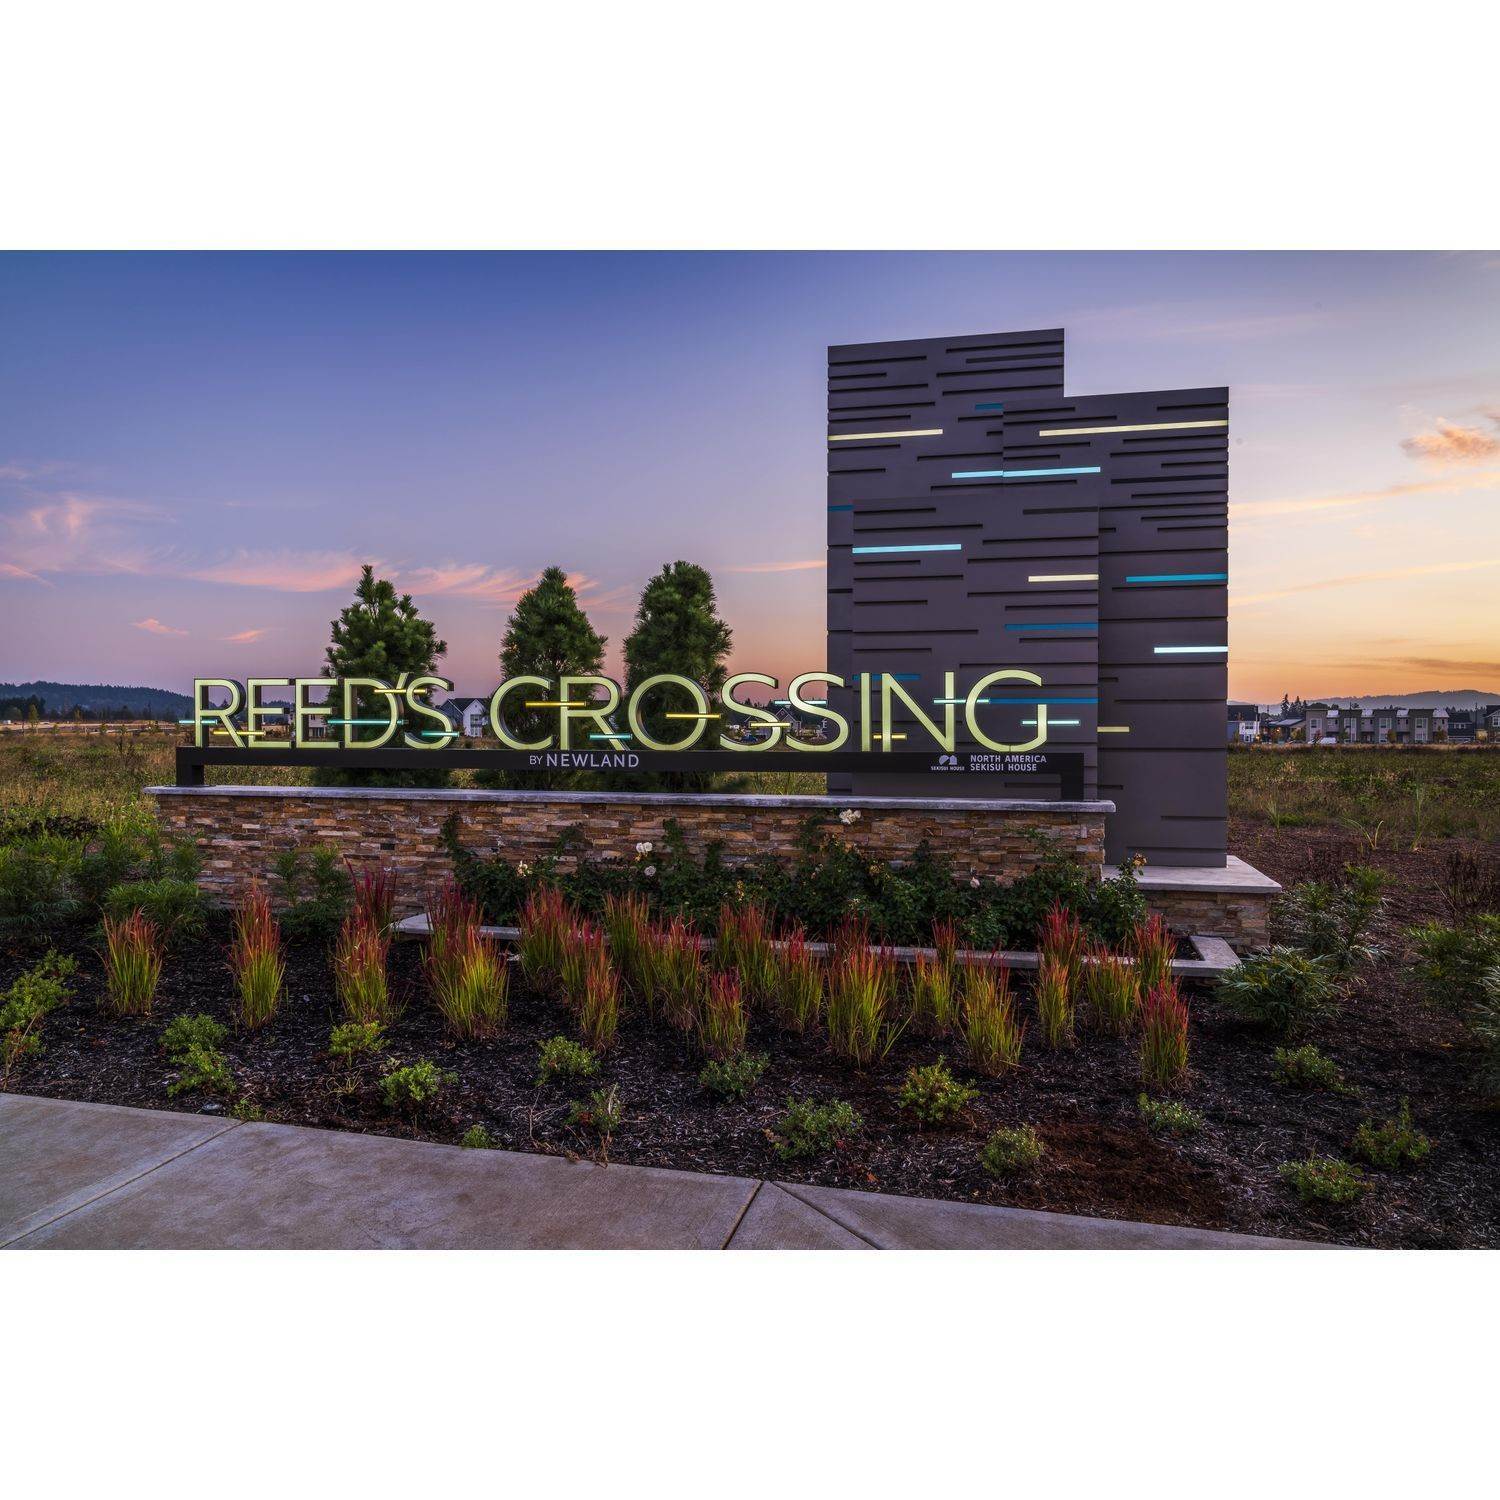 19. Reed's Crossing building at 8243 SE Stonecrop Ln, Hillsboro, OR 97123